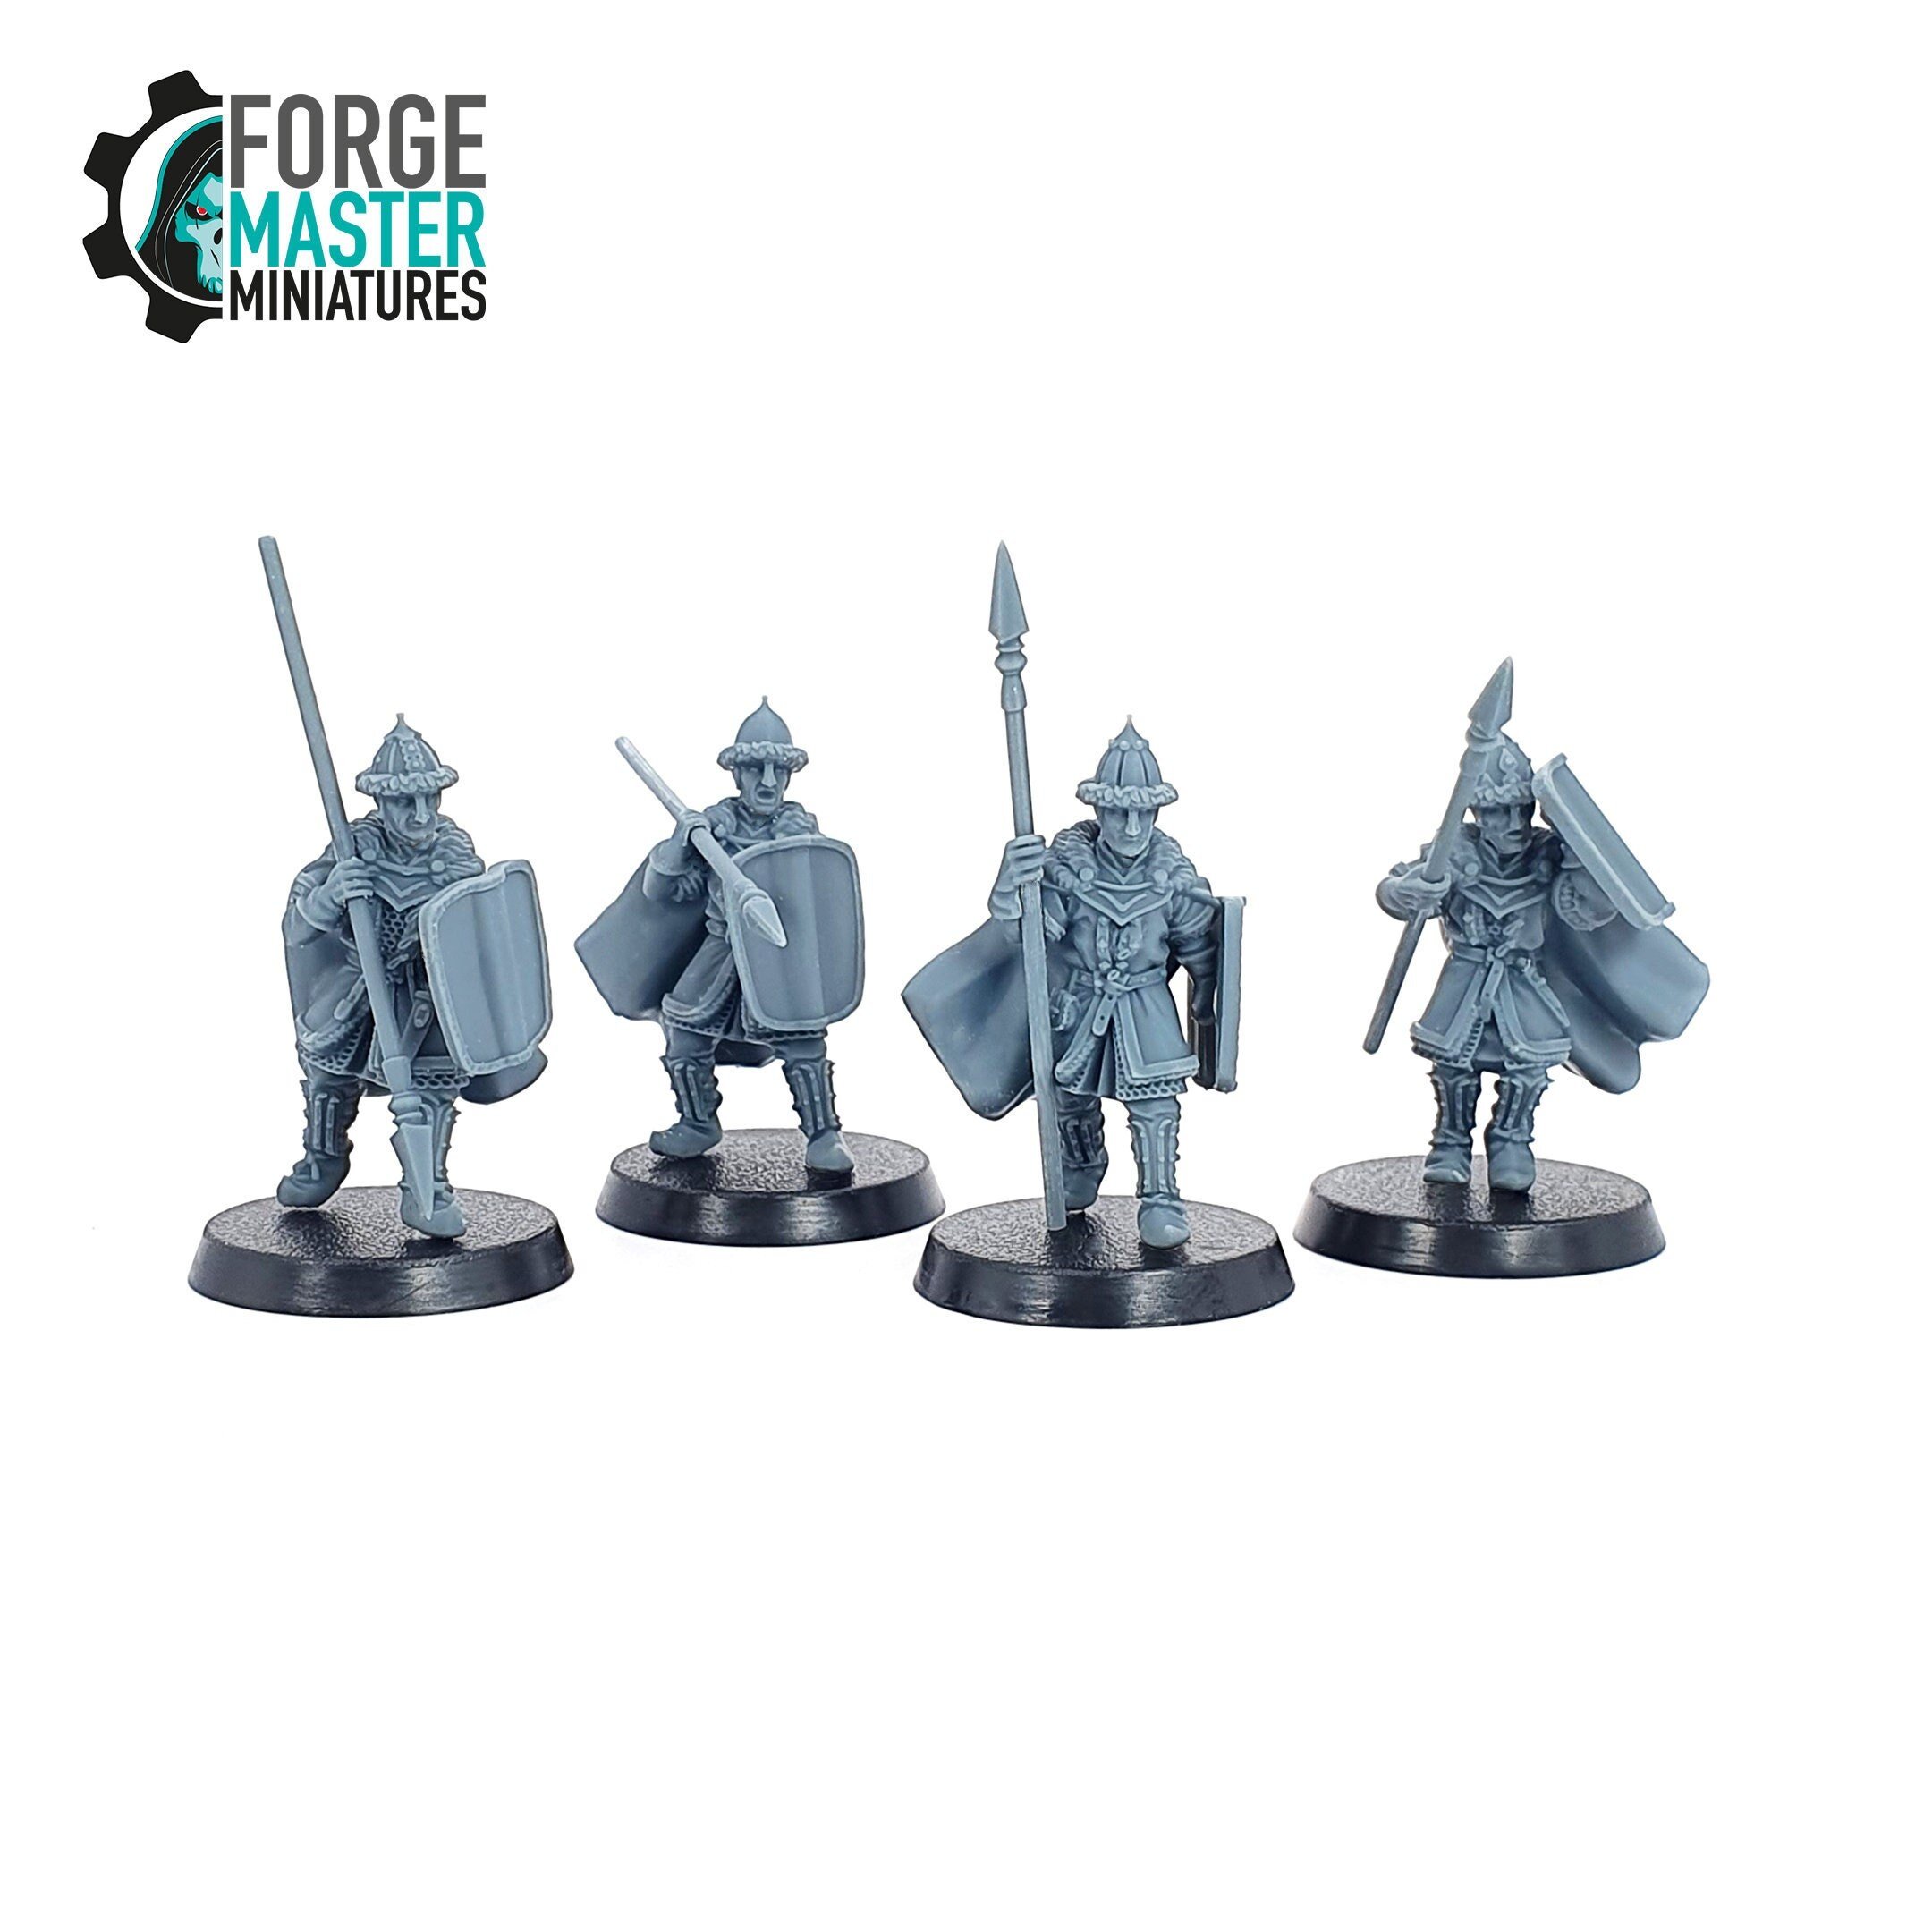 Torgorod City Guard Spearmen wargaming miniatures designed by Medbury Miniatures 3D printed by Forgemaster Miniatures